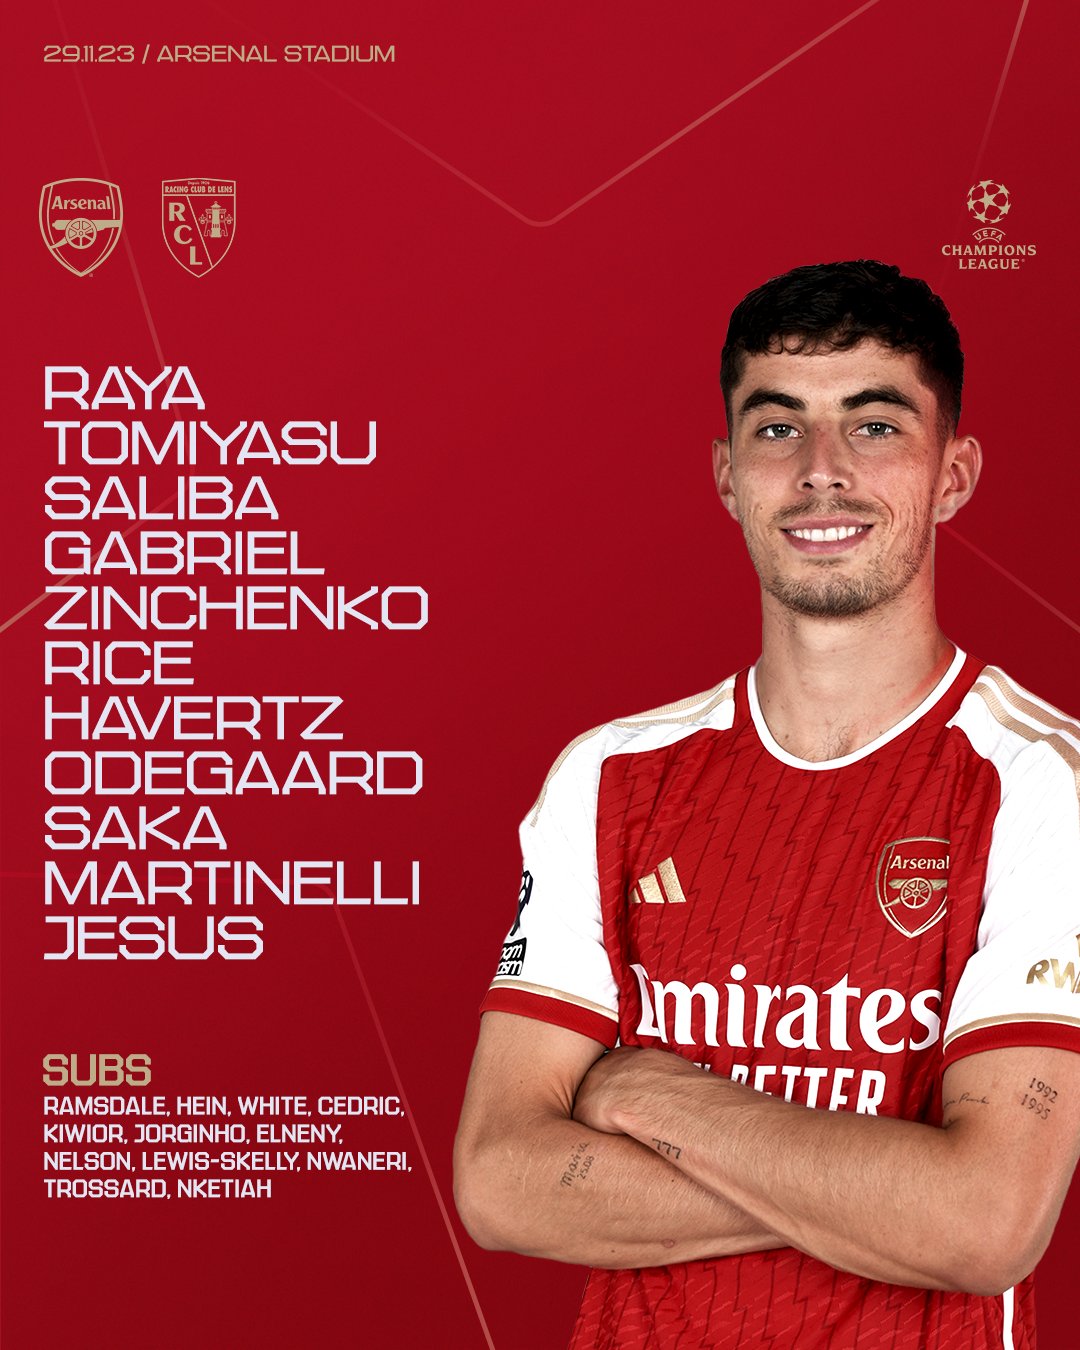 Arsenal on X: 🔴 𝗧𝗘𝗔𝗠𝙉𝙀𝙒𝙎 ⚪️ 🧱 Gabi at the back 🍚 Rice in the  middle 📞 Eddie leads the line Let's do this, Gunners 👊   / X